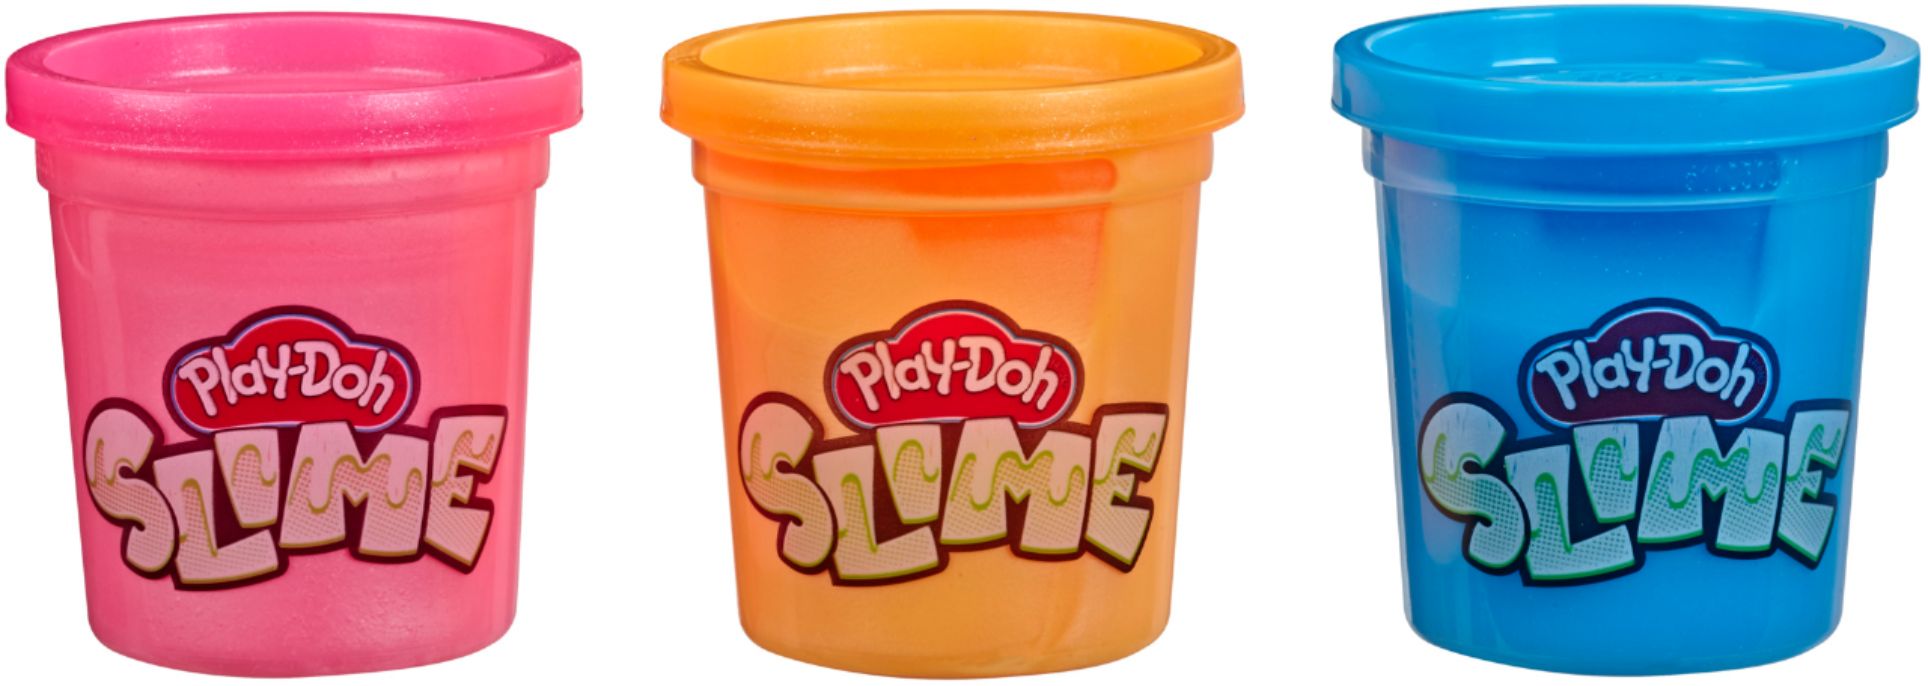 play doh and slime